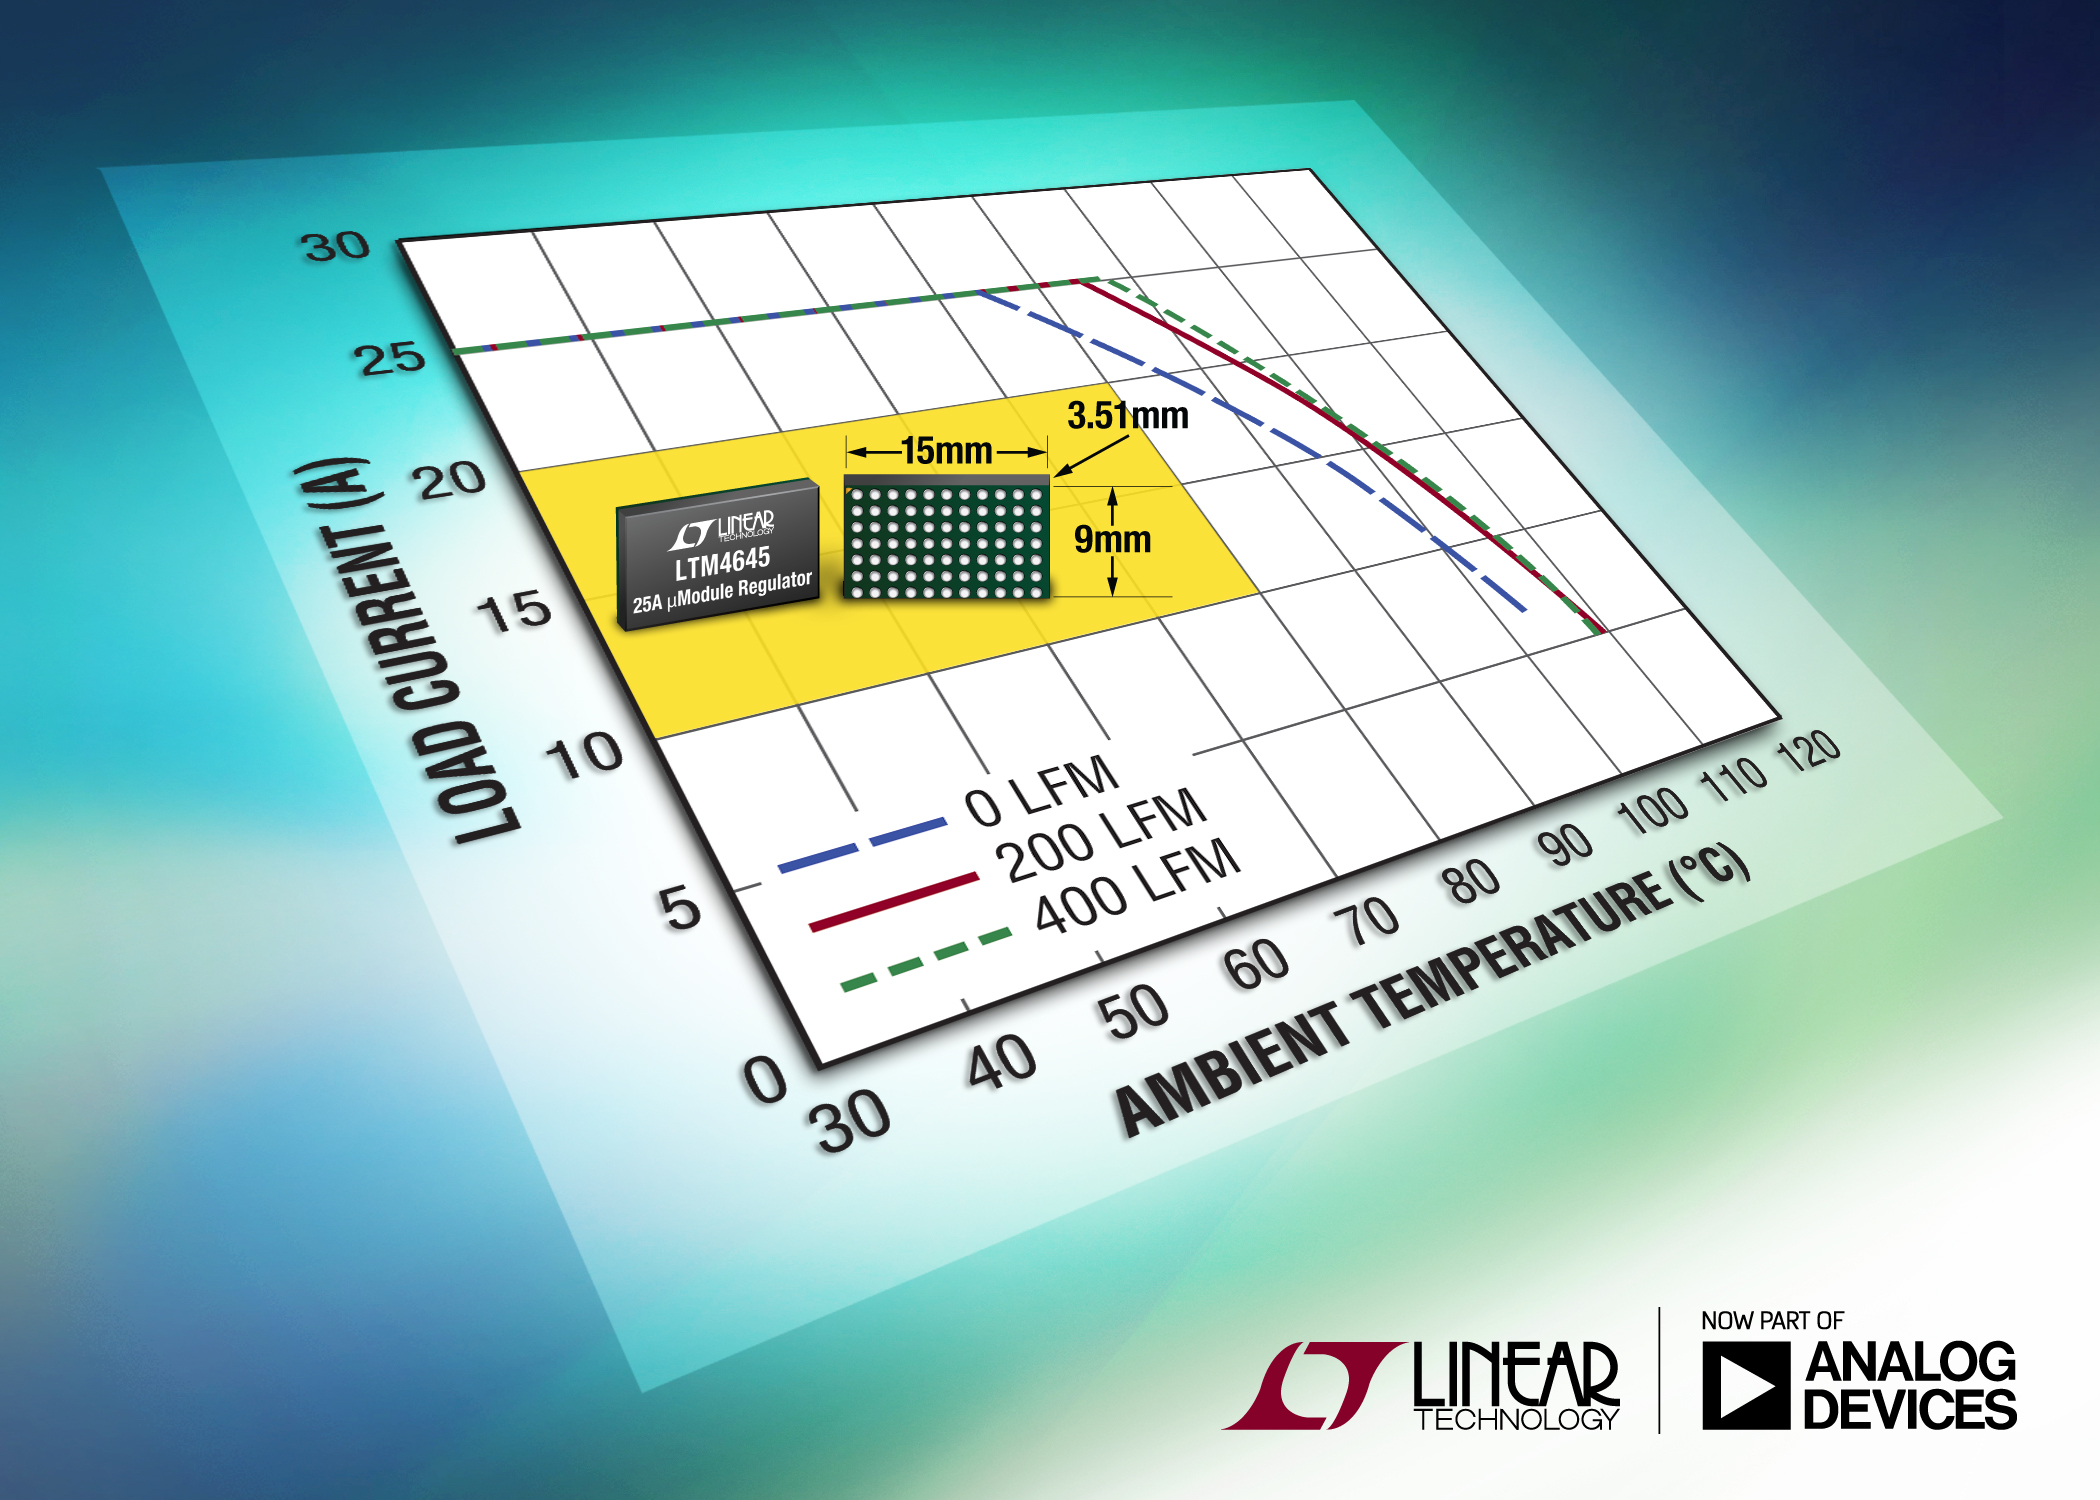 25A µModule Regulator Supports N+1 Redundancy Ensuring Power Availability under Fault Conditions